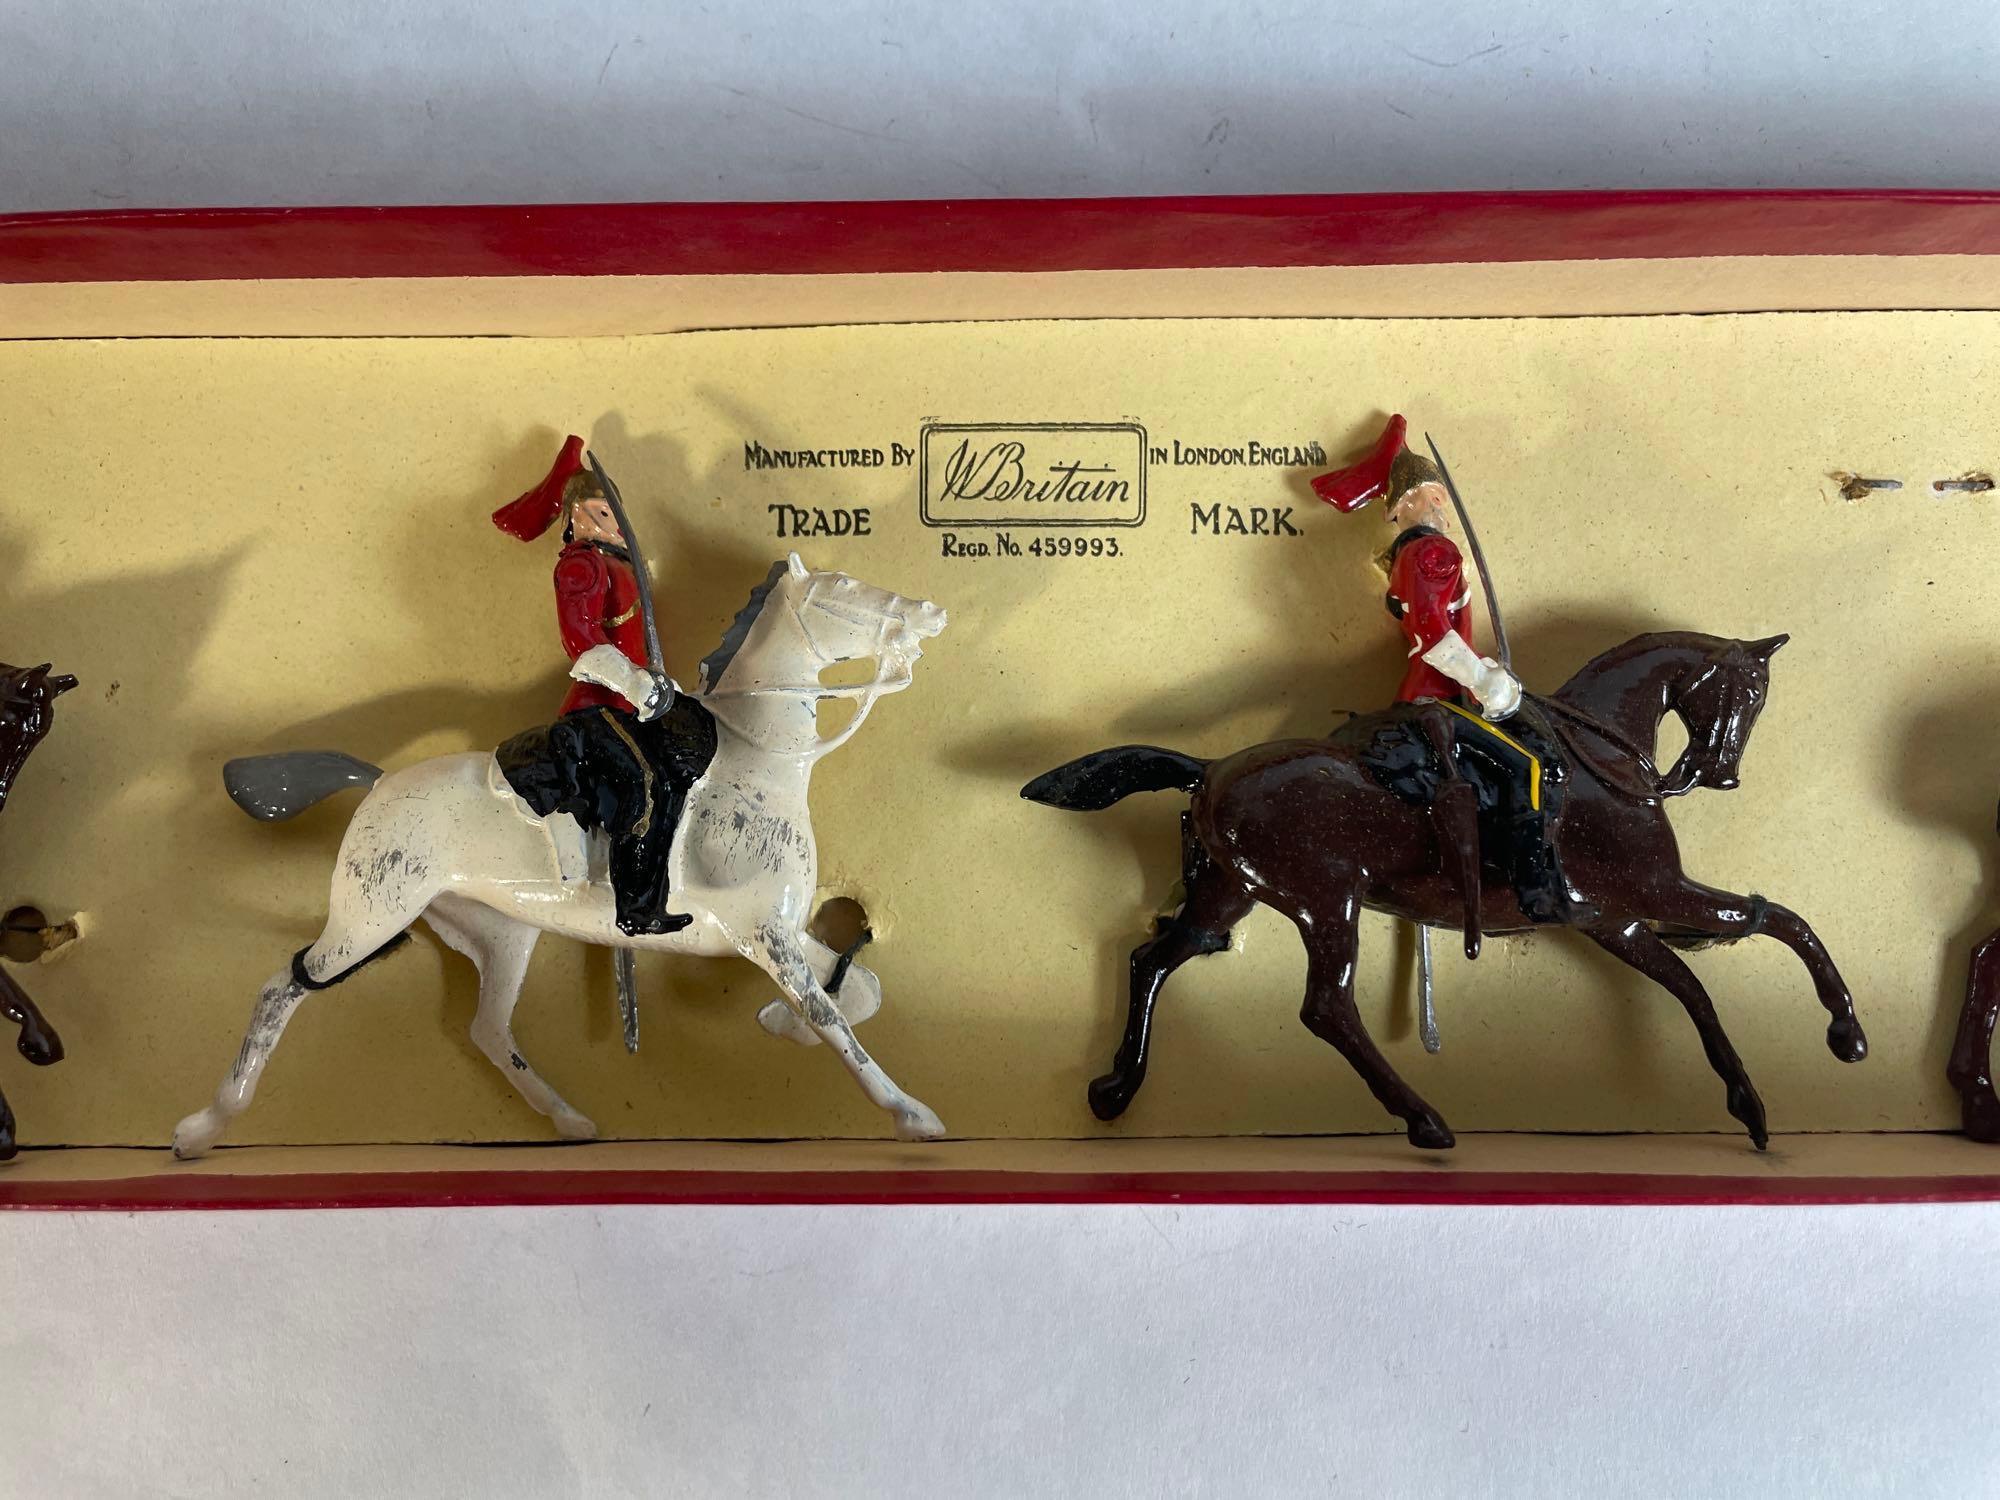 Britains "The Life Guards Mounted," 5-Pc Lead Figurines w/ Original Box No. 400